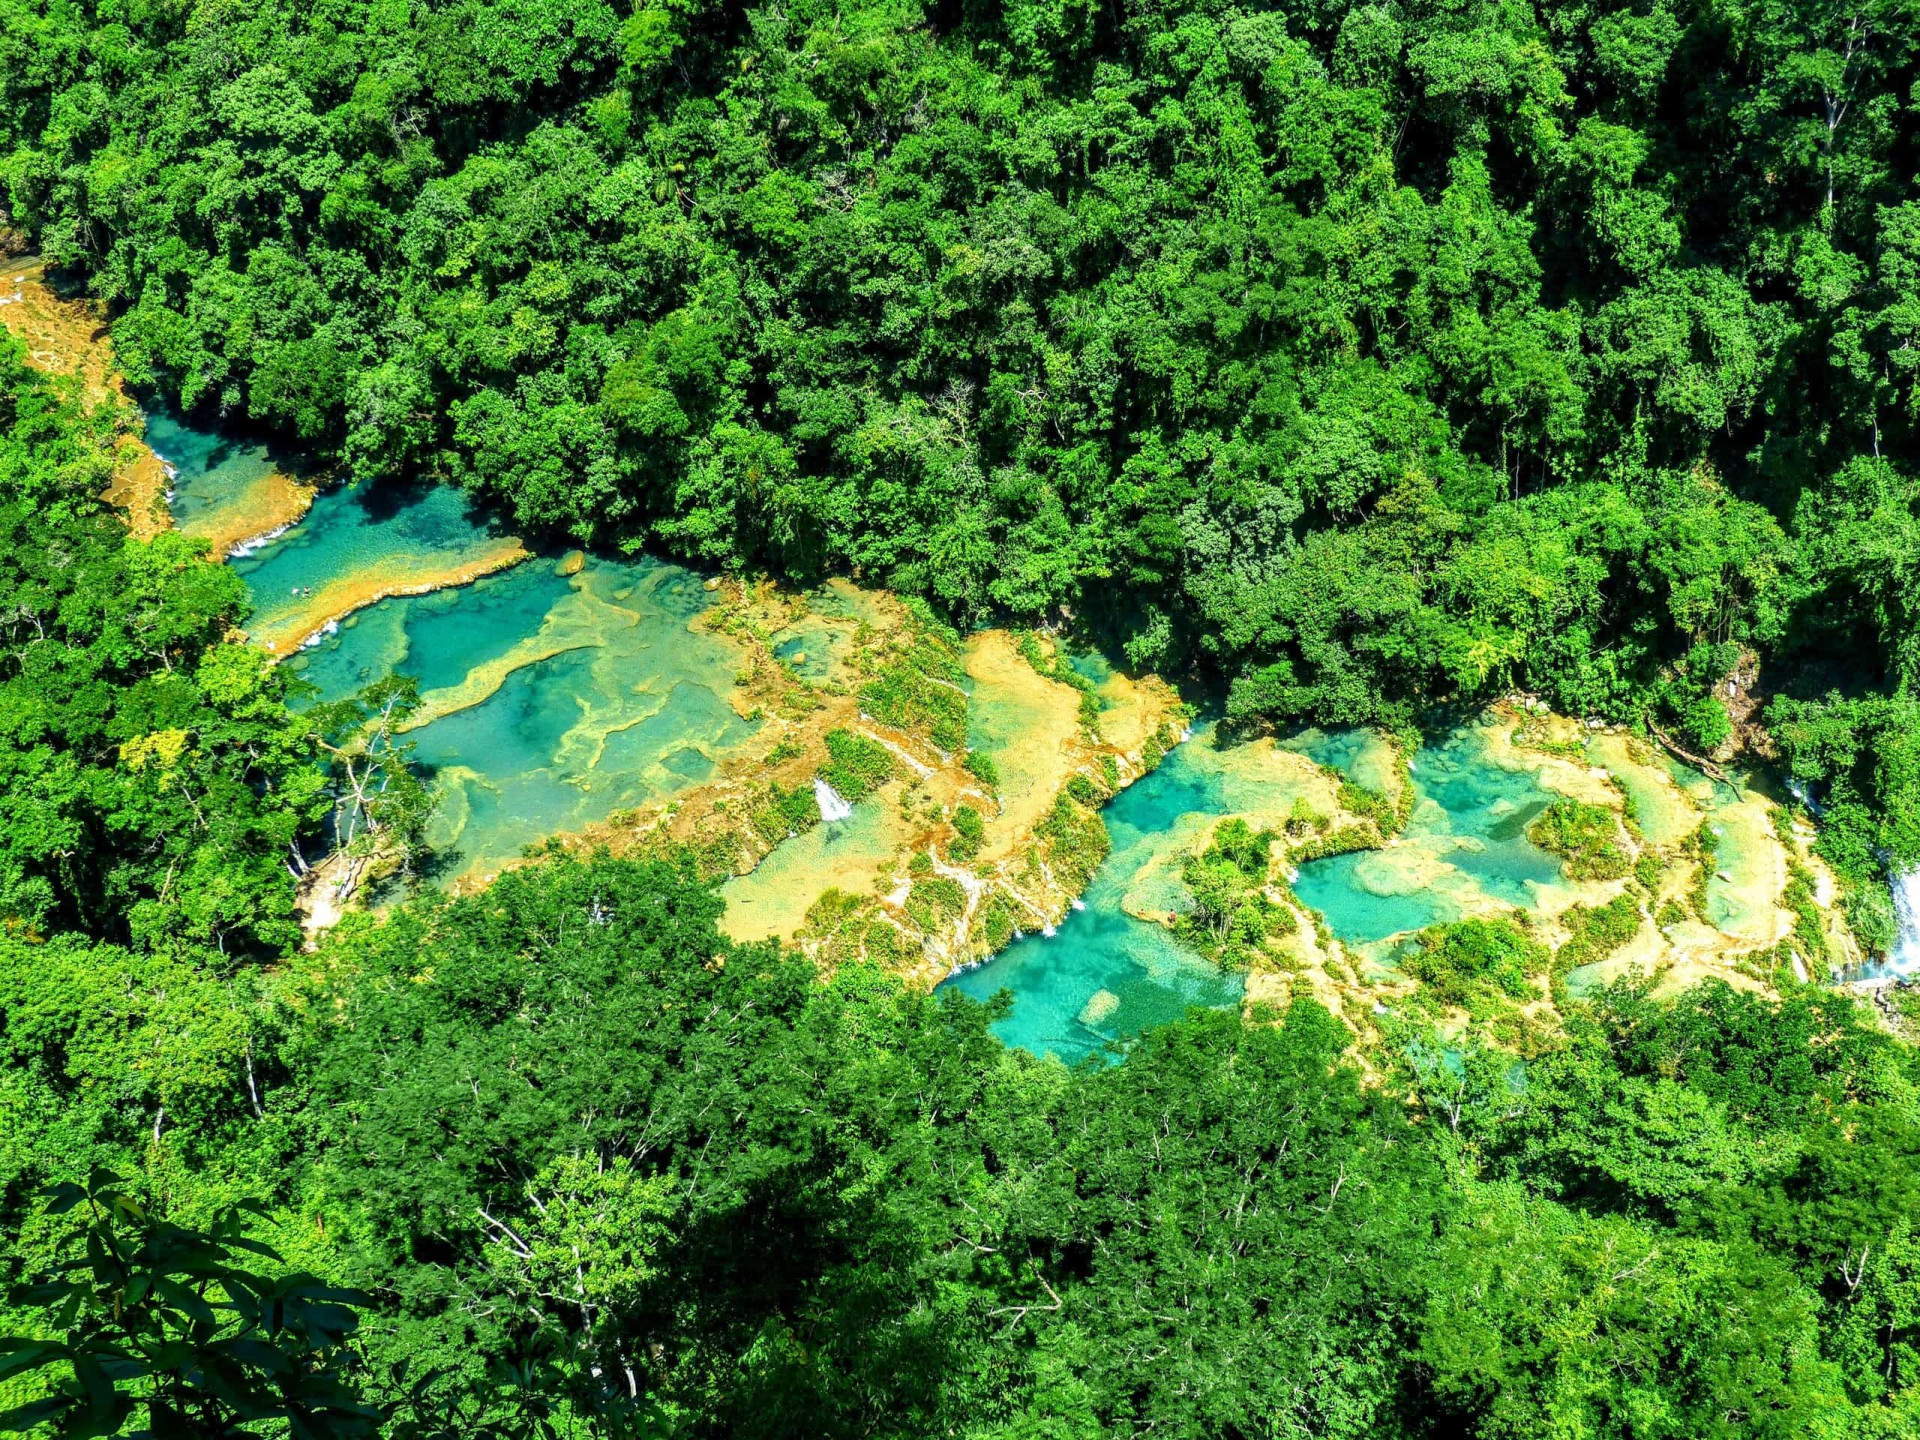 The stepped, natural pools embedded within this natural monument known as Semuc Champey, which means "where the river hides under the stones," sparkle in glorious turquoise. No wonder it's a desired (albeit remote) <a href="https://uk.starsinsider.com/travel/302159/amazing-secluded-swimming-spots-around-the-world">swimming</a> destination.